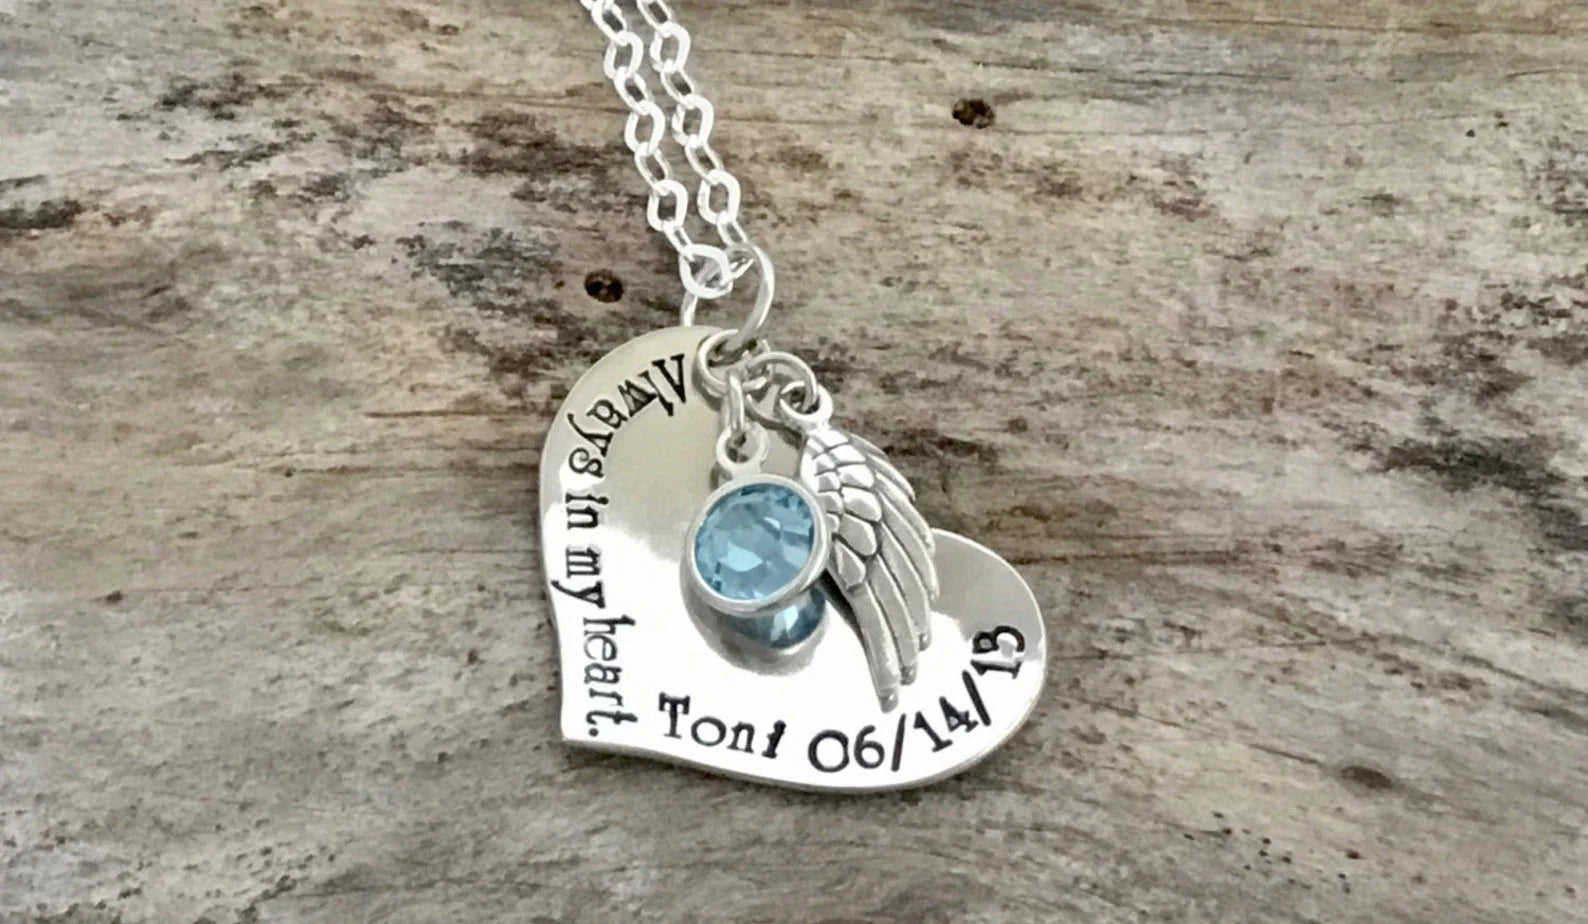 Urn necklace - Hand stamped necklace - Loss necklace - Cremation jewelry - Memorial  necklace - Stainless steel heart - Cremation necklace